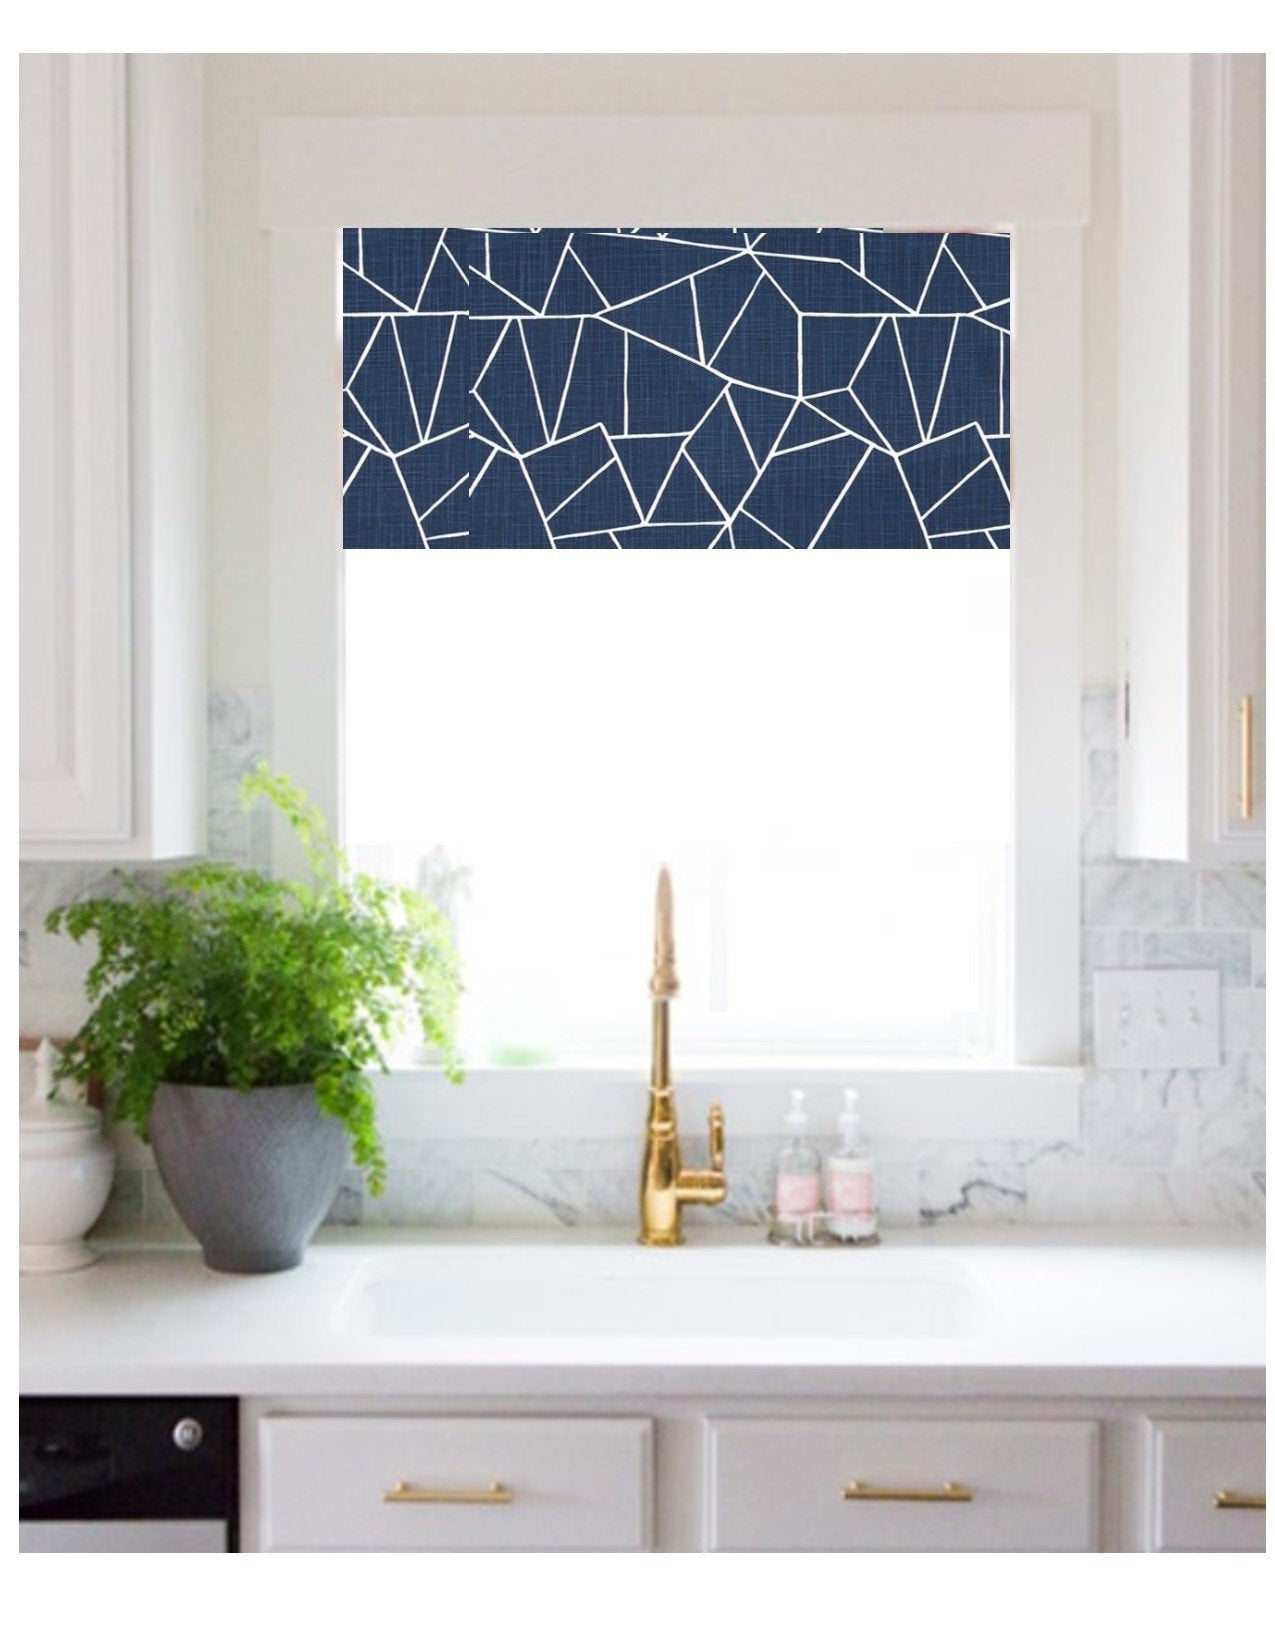 Straight Custom Valance in Modern Cut Glass Print, Navy, Black, Grey and White on Cotton Slub Canvas, Fully Lined Kitchen Window Treatments